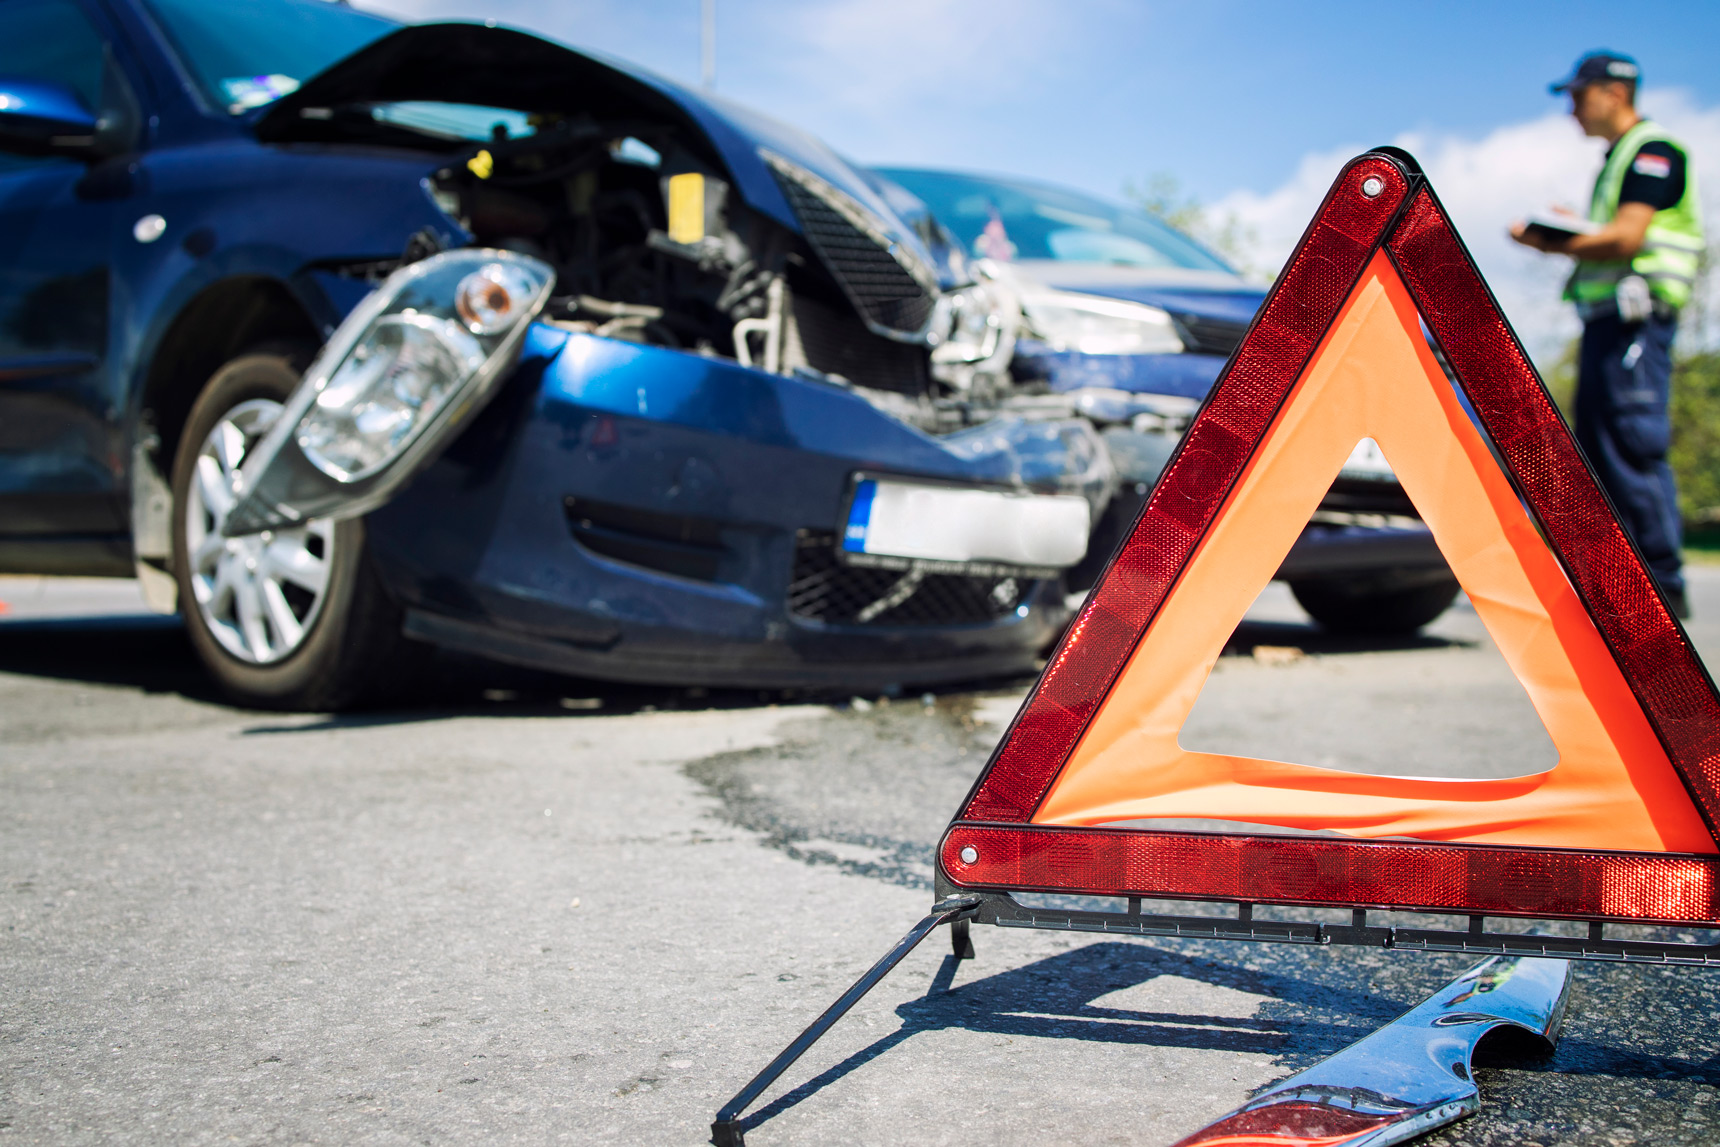  An image of a car crash with a warning triangle in the foreground and a police officer in the background.